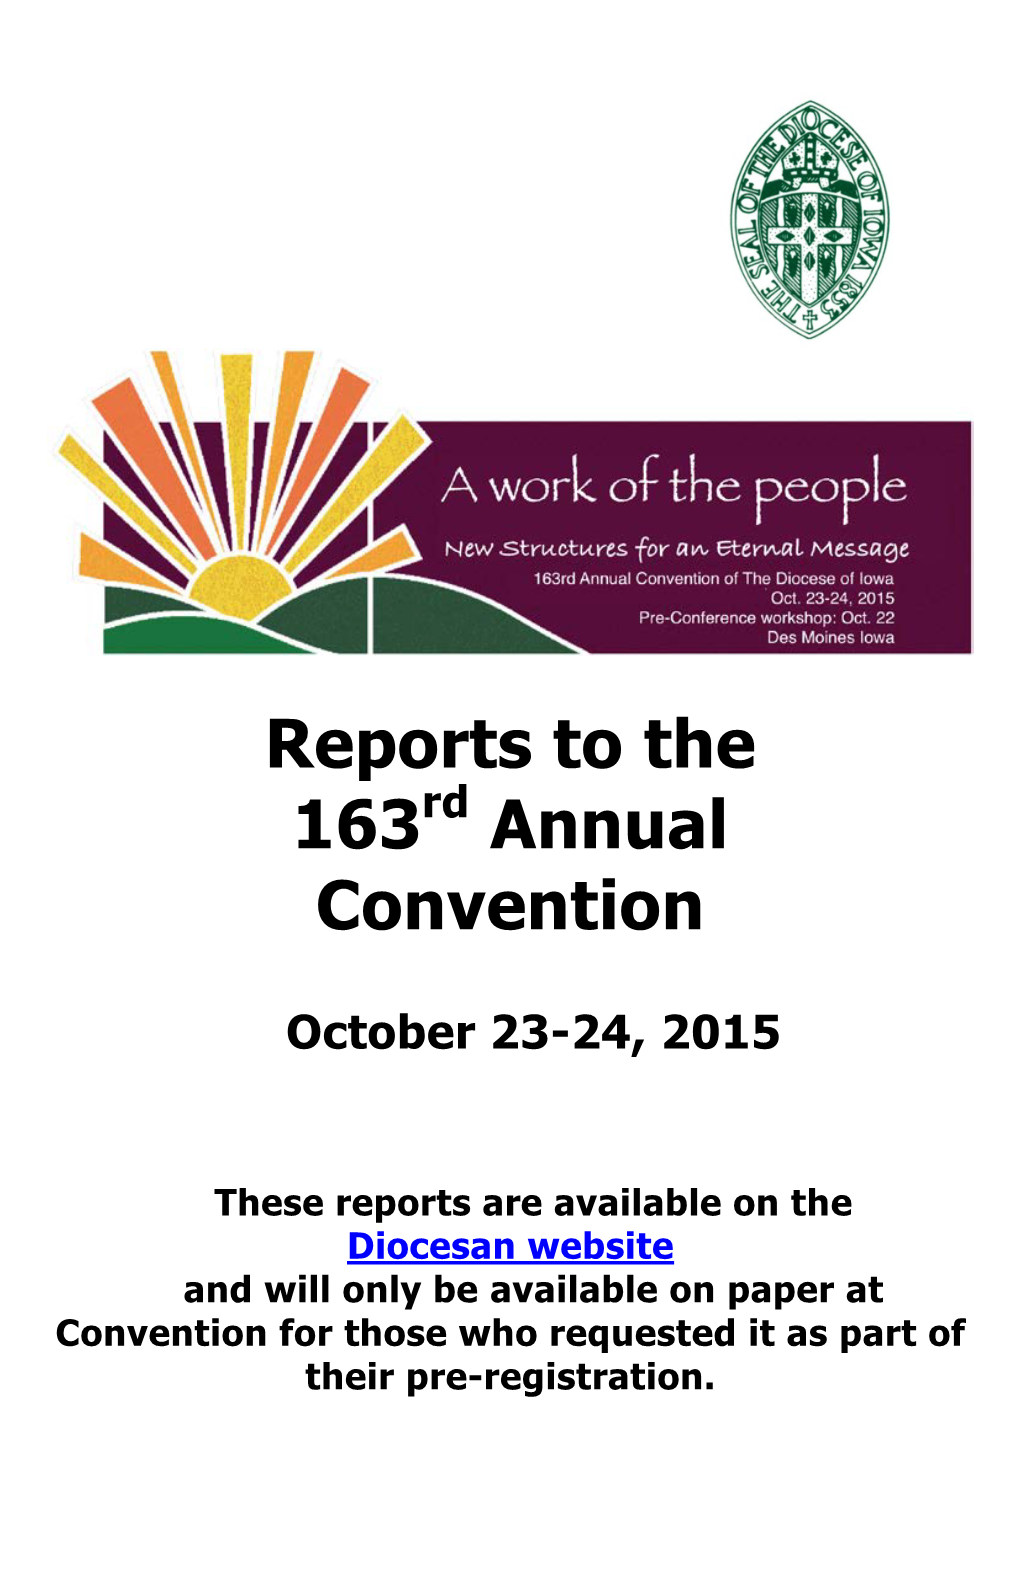 Reports to the 163Rd Annual Convention